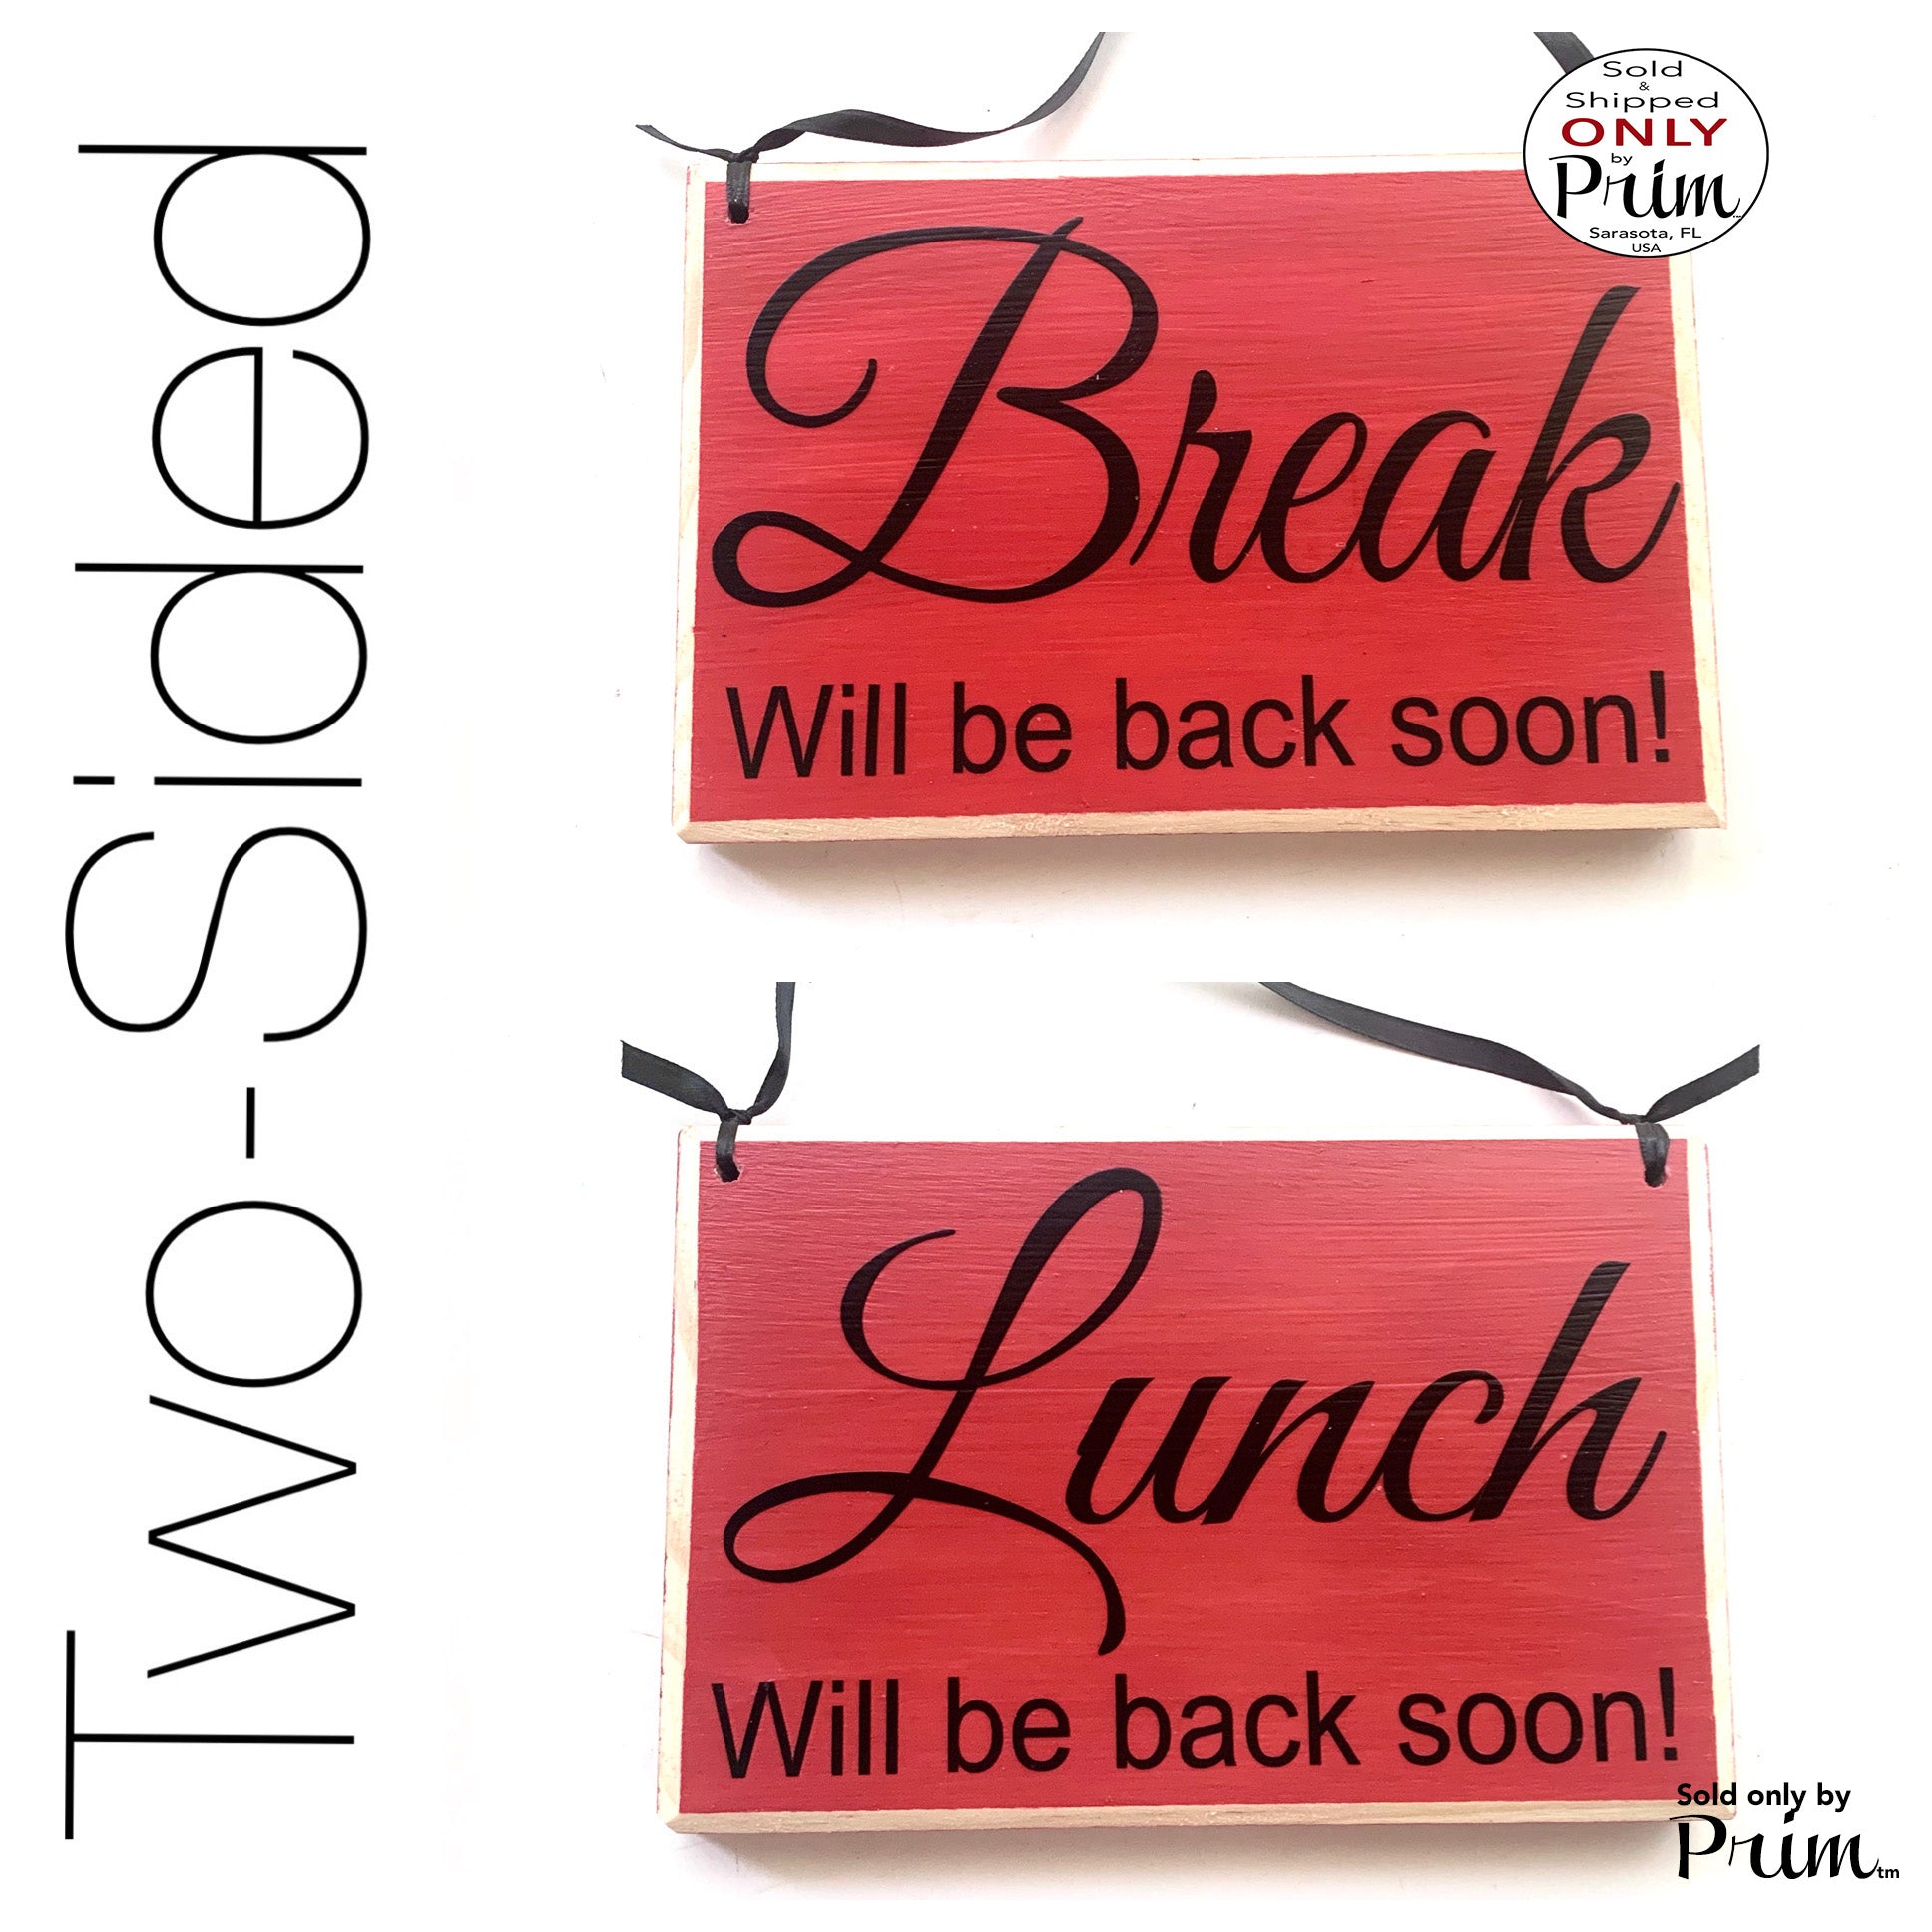 Designs by Prim Lunch Break Will Be Back Soon Two Sided 8x6 Out of Office Sorry We Missed You Custom Wood Sign Open Closed Spa Salon Office Door Hanger